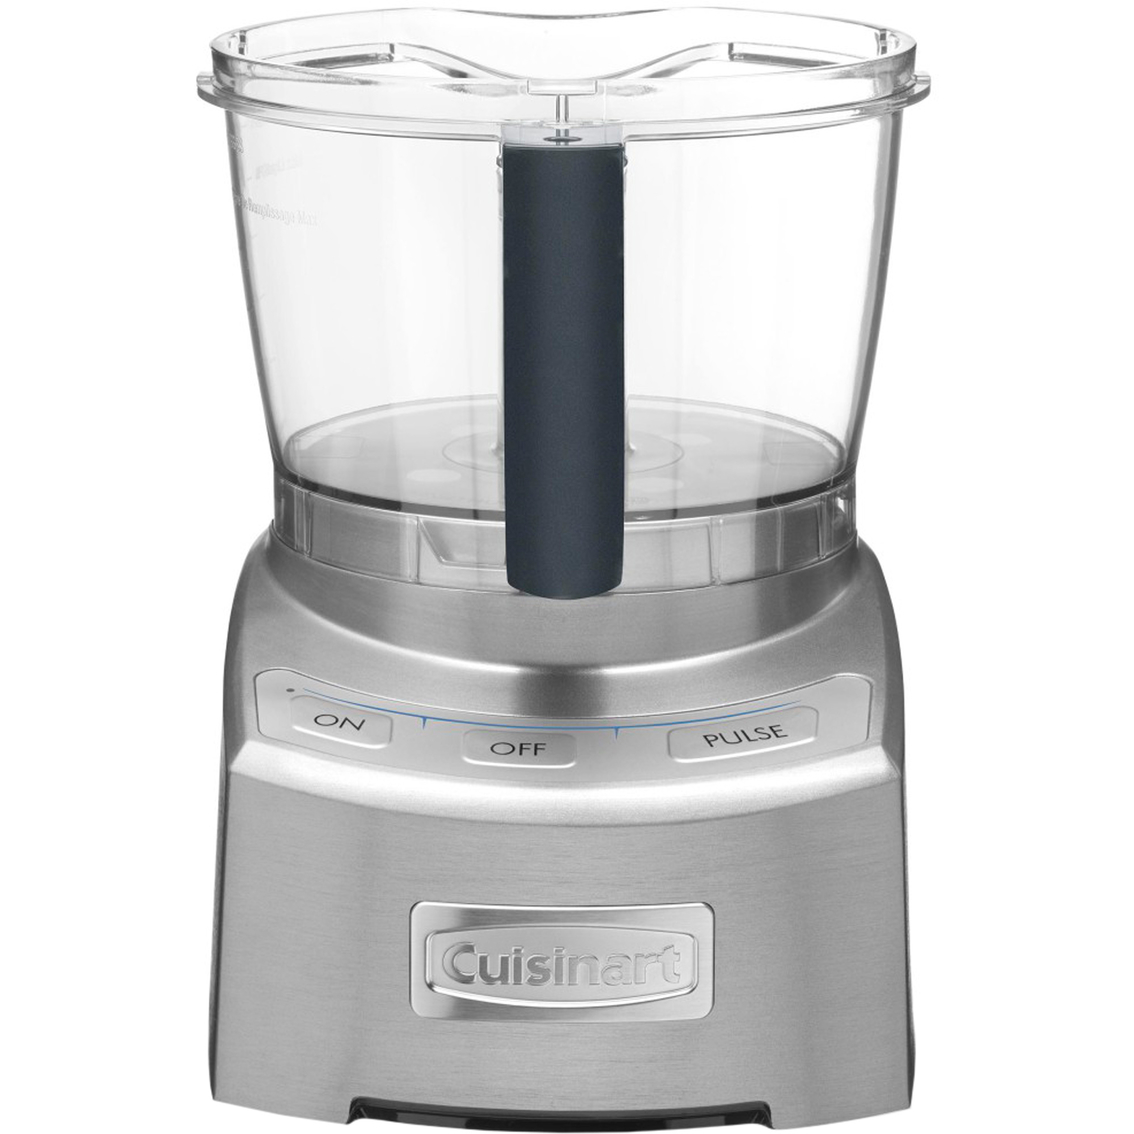 Elite Collection 2.0 12-Cup Food Processor in Die Cast - Image 1 of 9